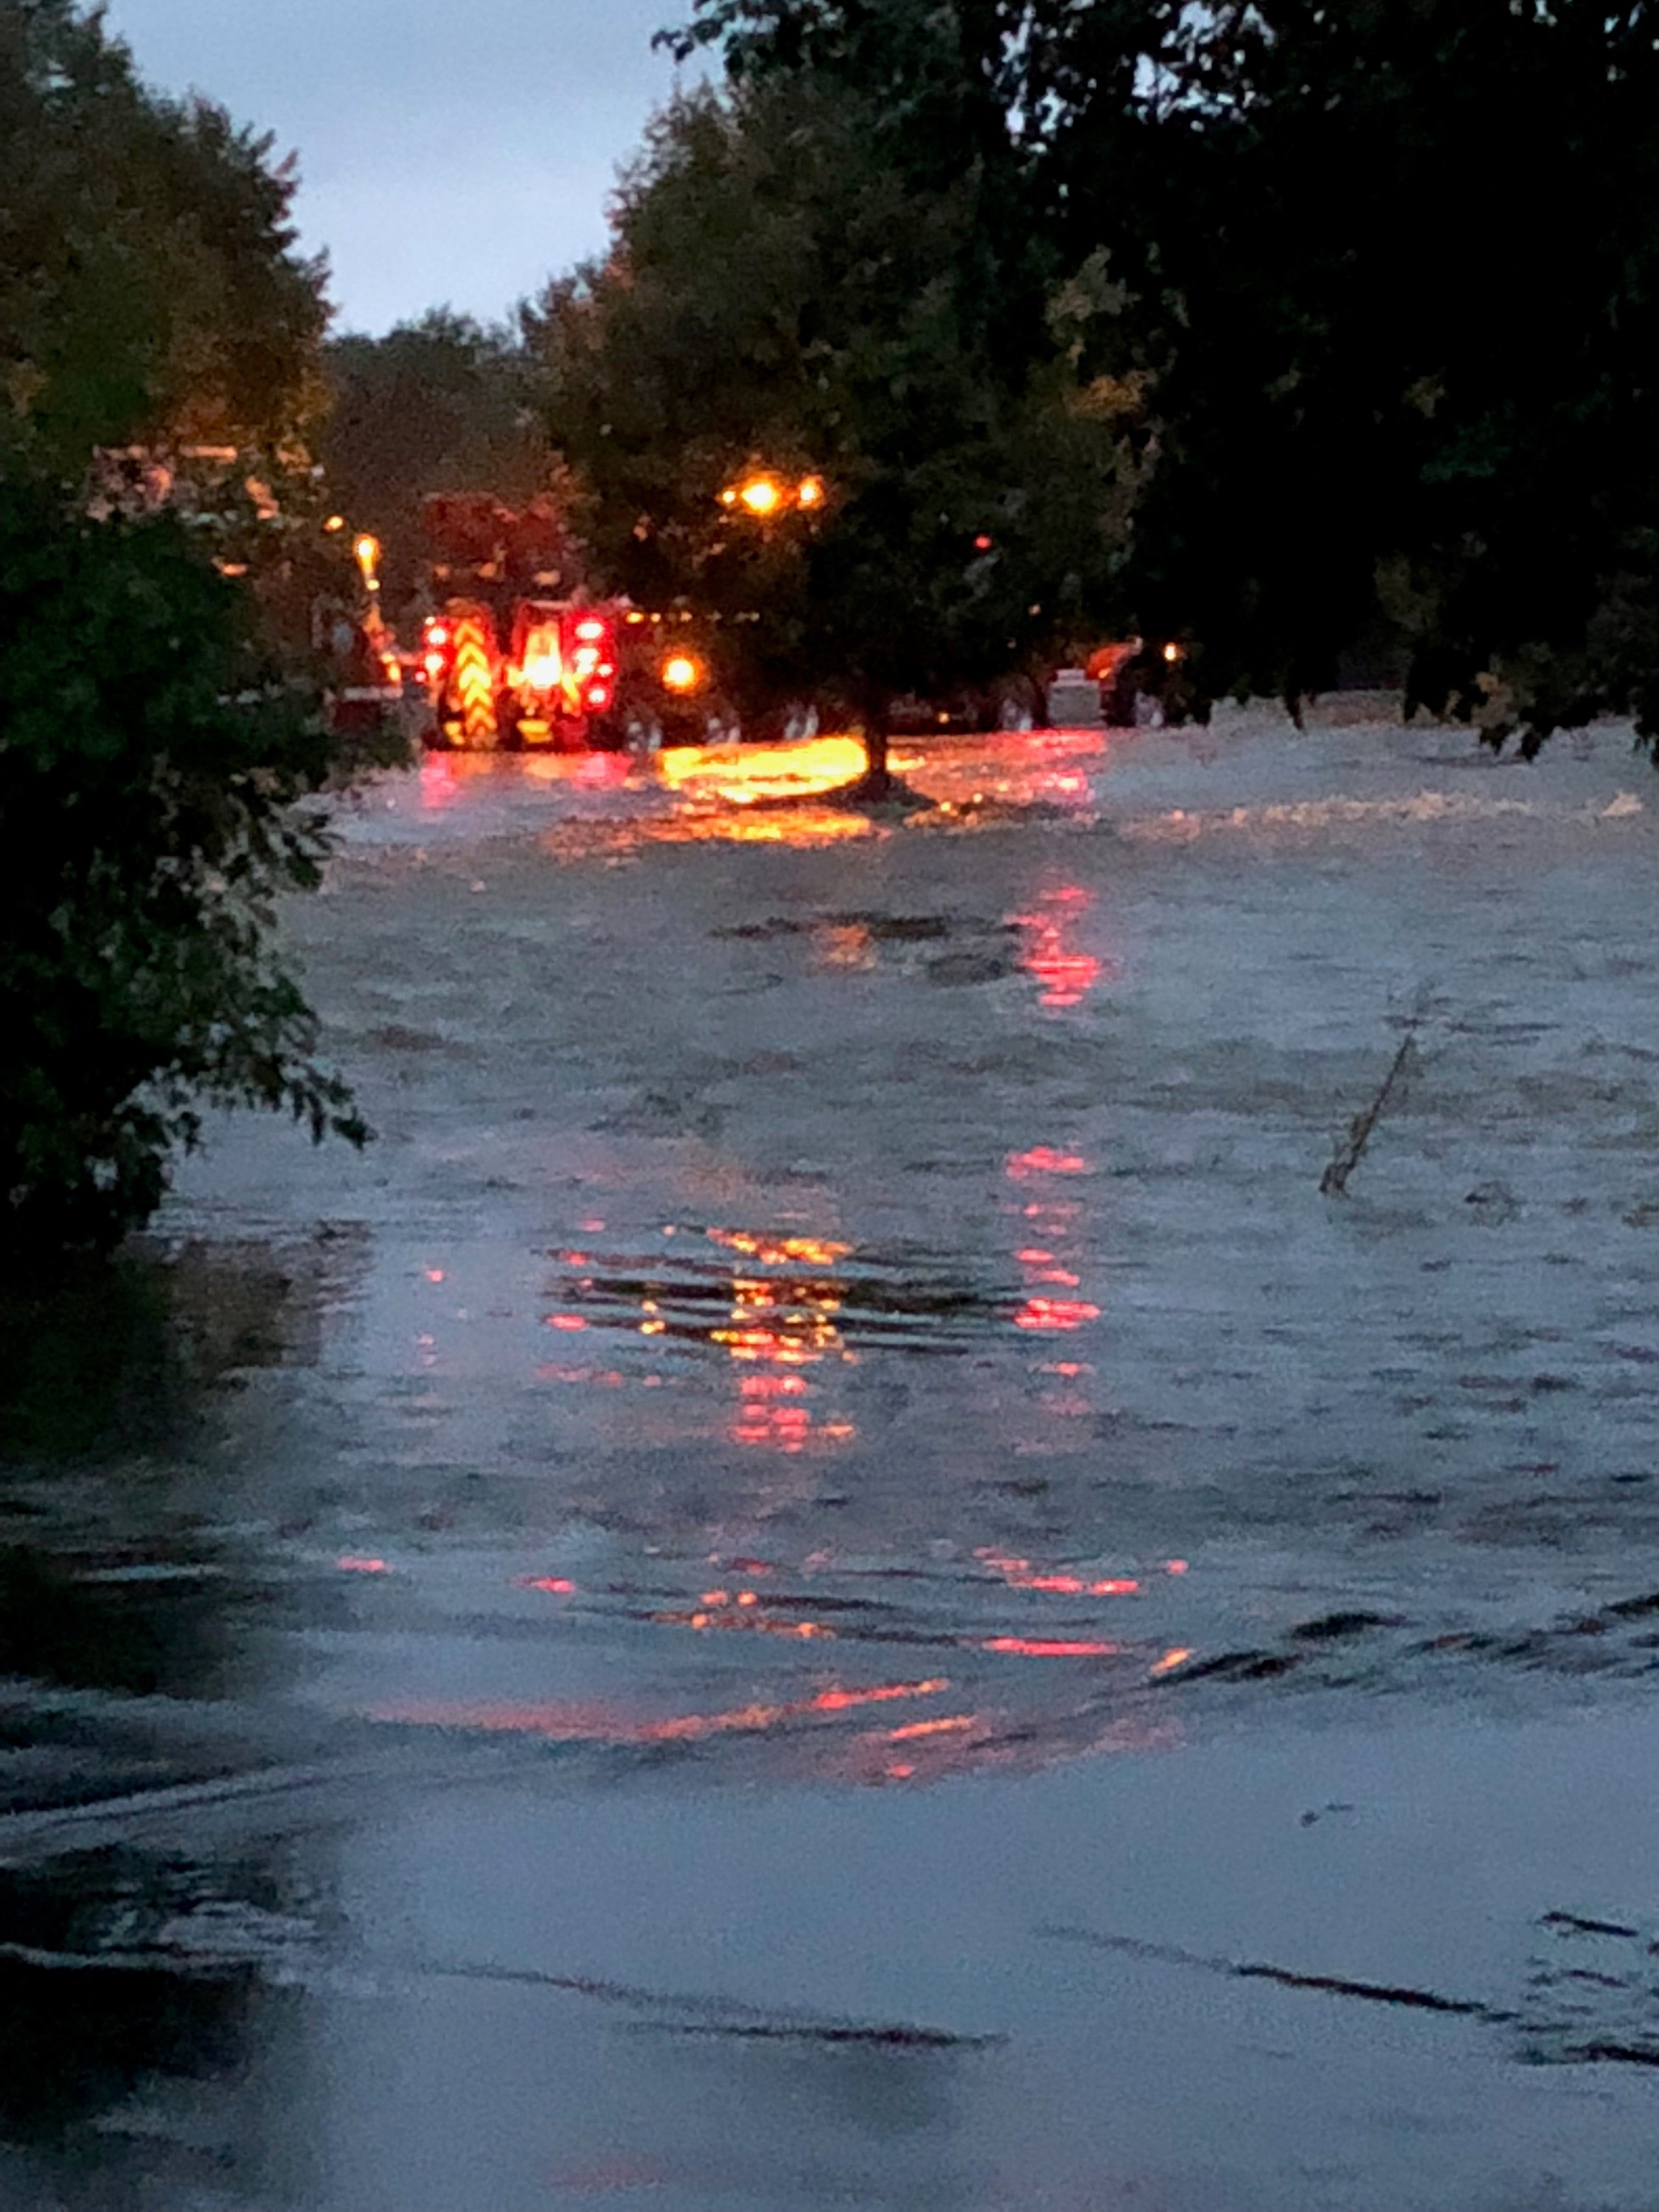 WDNR wardens were among numerous emergency response agencies at flooded and washed out roads that caught drivers by surprise in Madison and other western Dane County communities overnight August 20 as a record-setting rainfall pummeled the area.